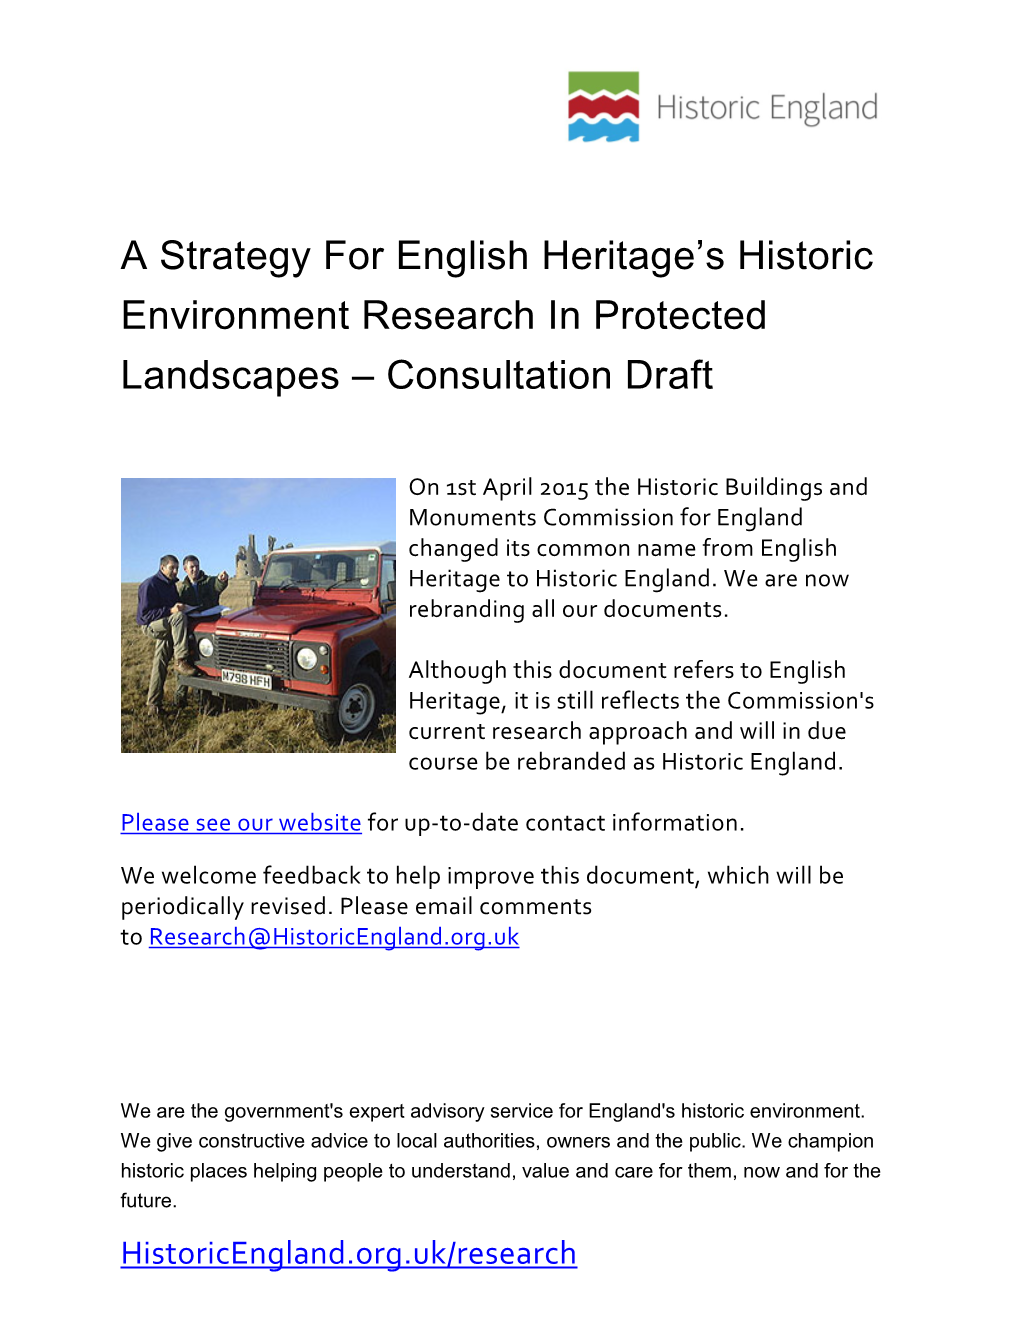 A Strategy for English Heritage's Historic Environment Research In